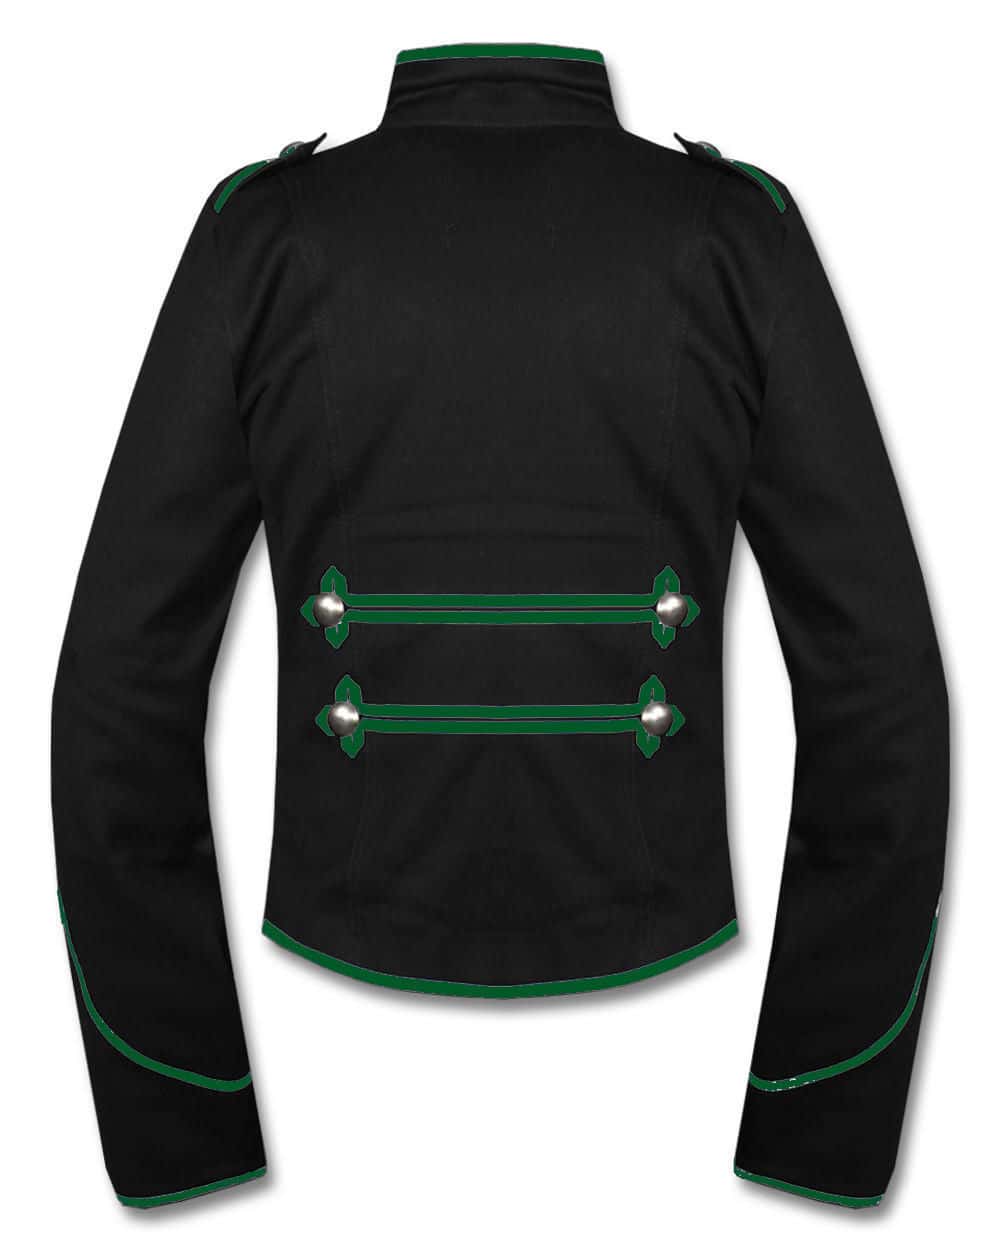 Military Marching Band Drummer Jacket, Traditional Jackets, Jackets for Men, Best Traditional Jackets